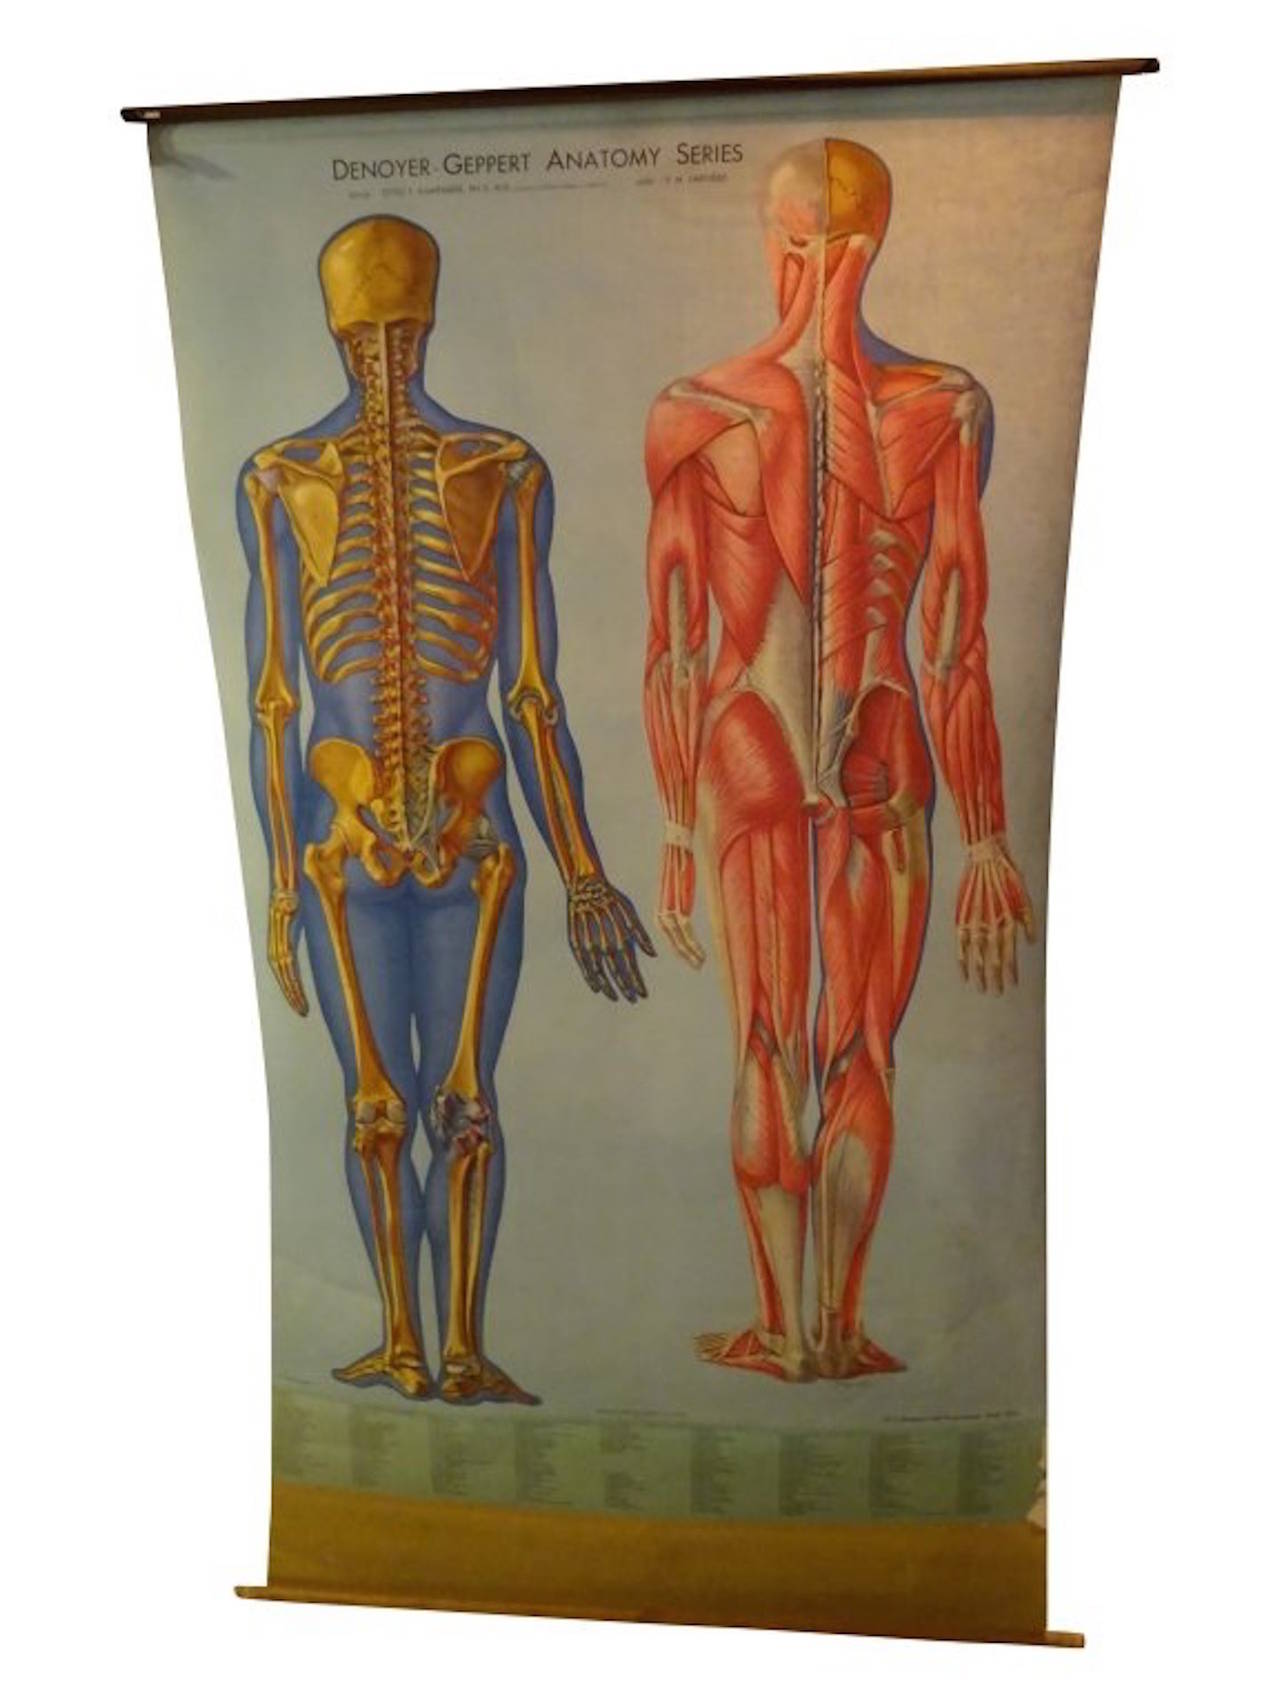 Two Large Vintage Anatomy Charts, Each one  of thick cotton paper. One showing the front,one showing the back of the human anatomy. Vibrant colors, published by Denoyer & Geppert, Chicago. Good Condition, both are still 